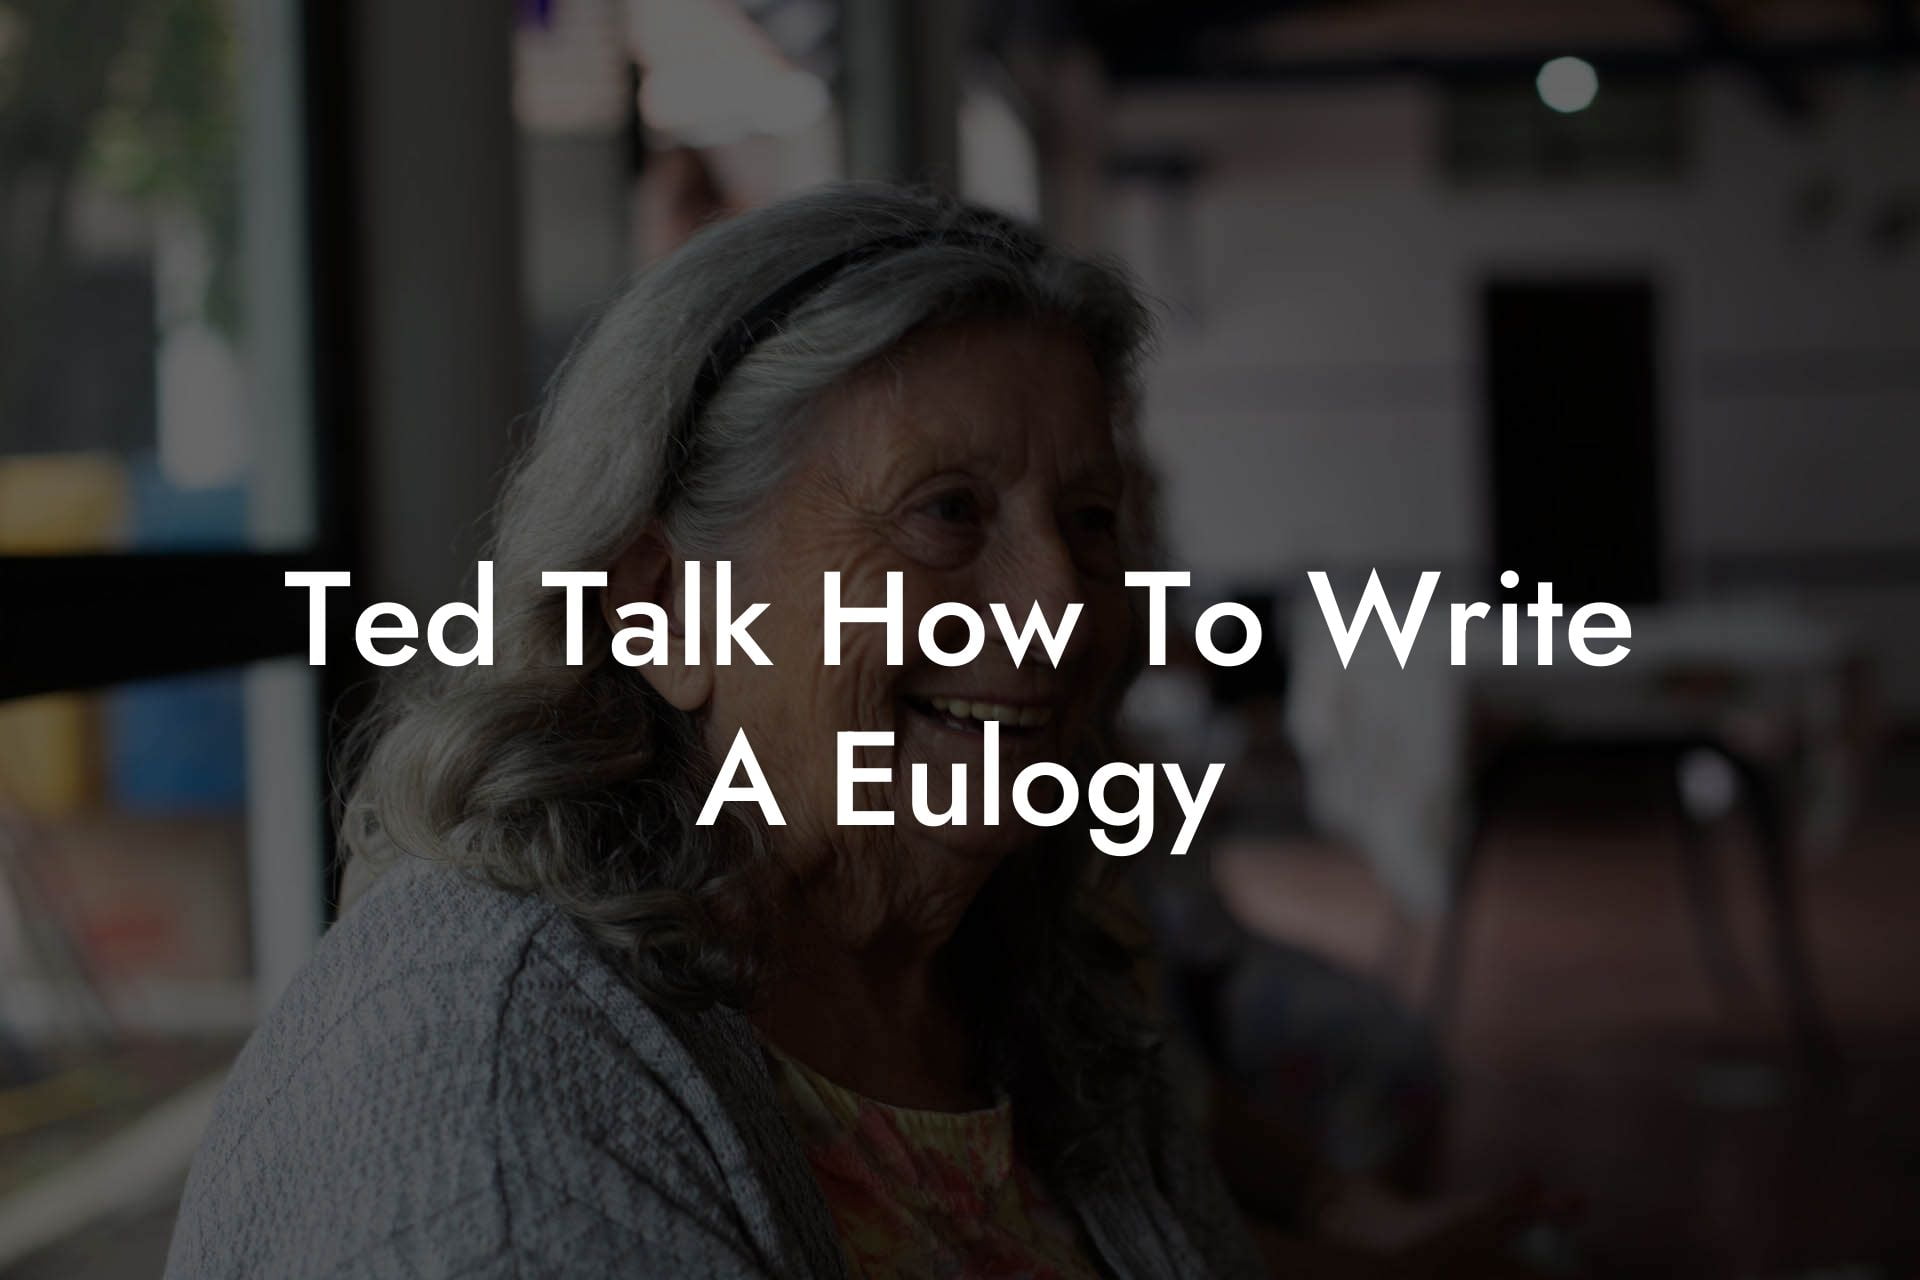 Ted Talk How To Write A Eulogy